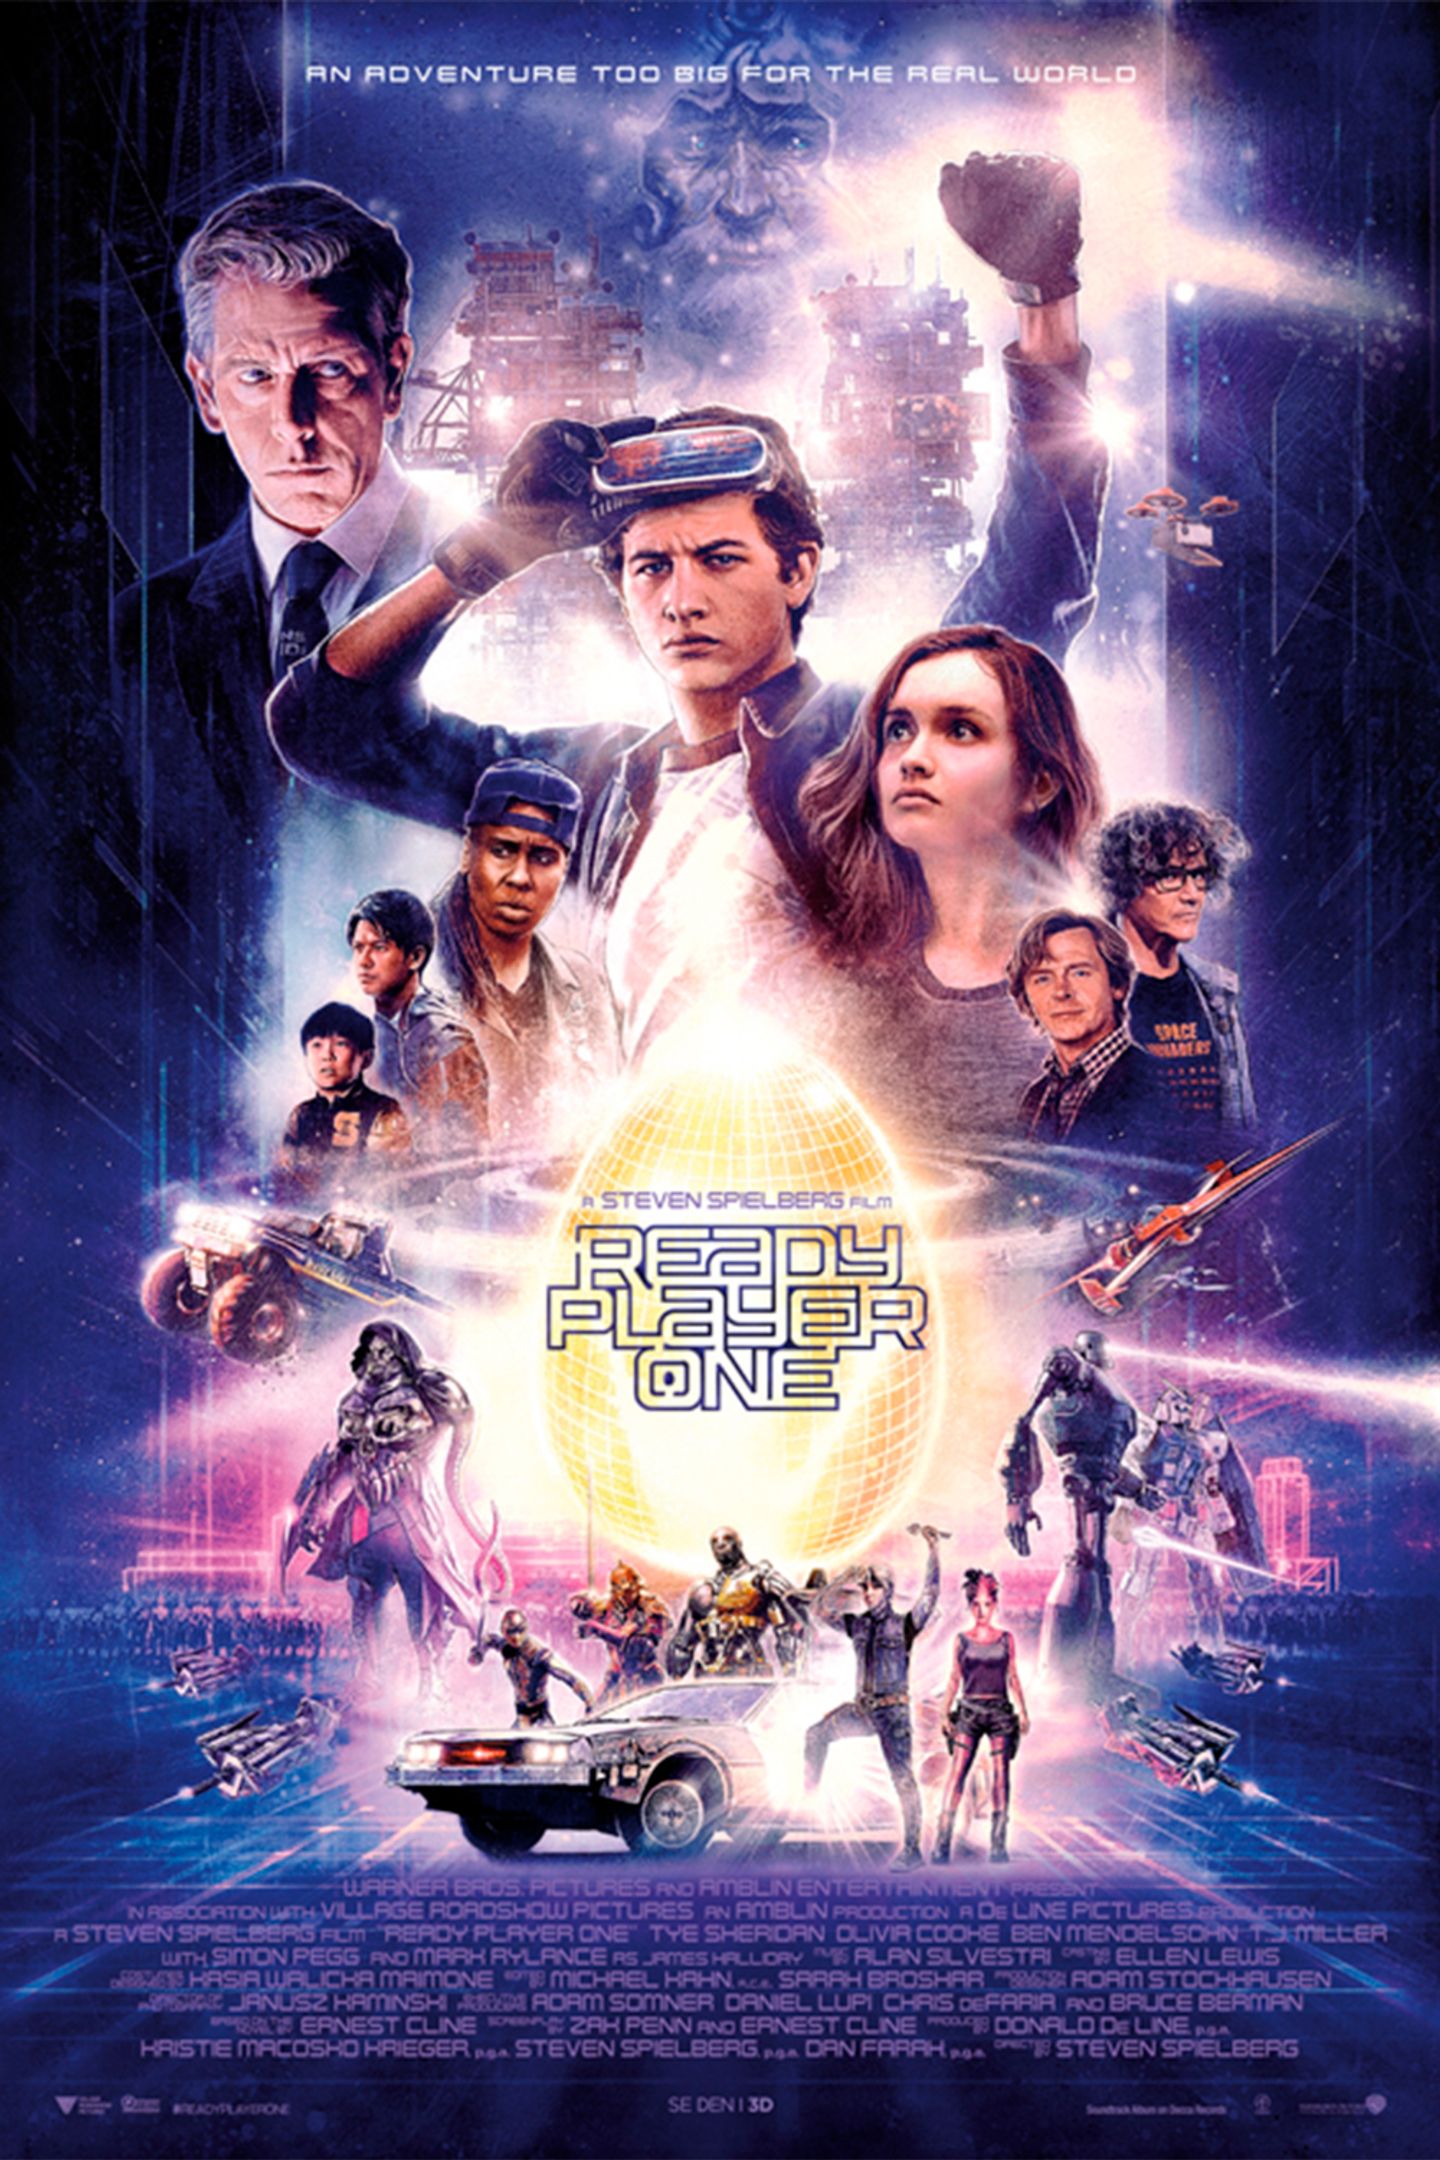 Plakat for 'Ready Player One (3D)'